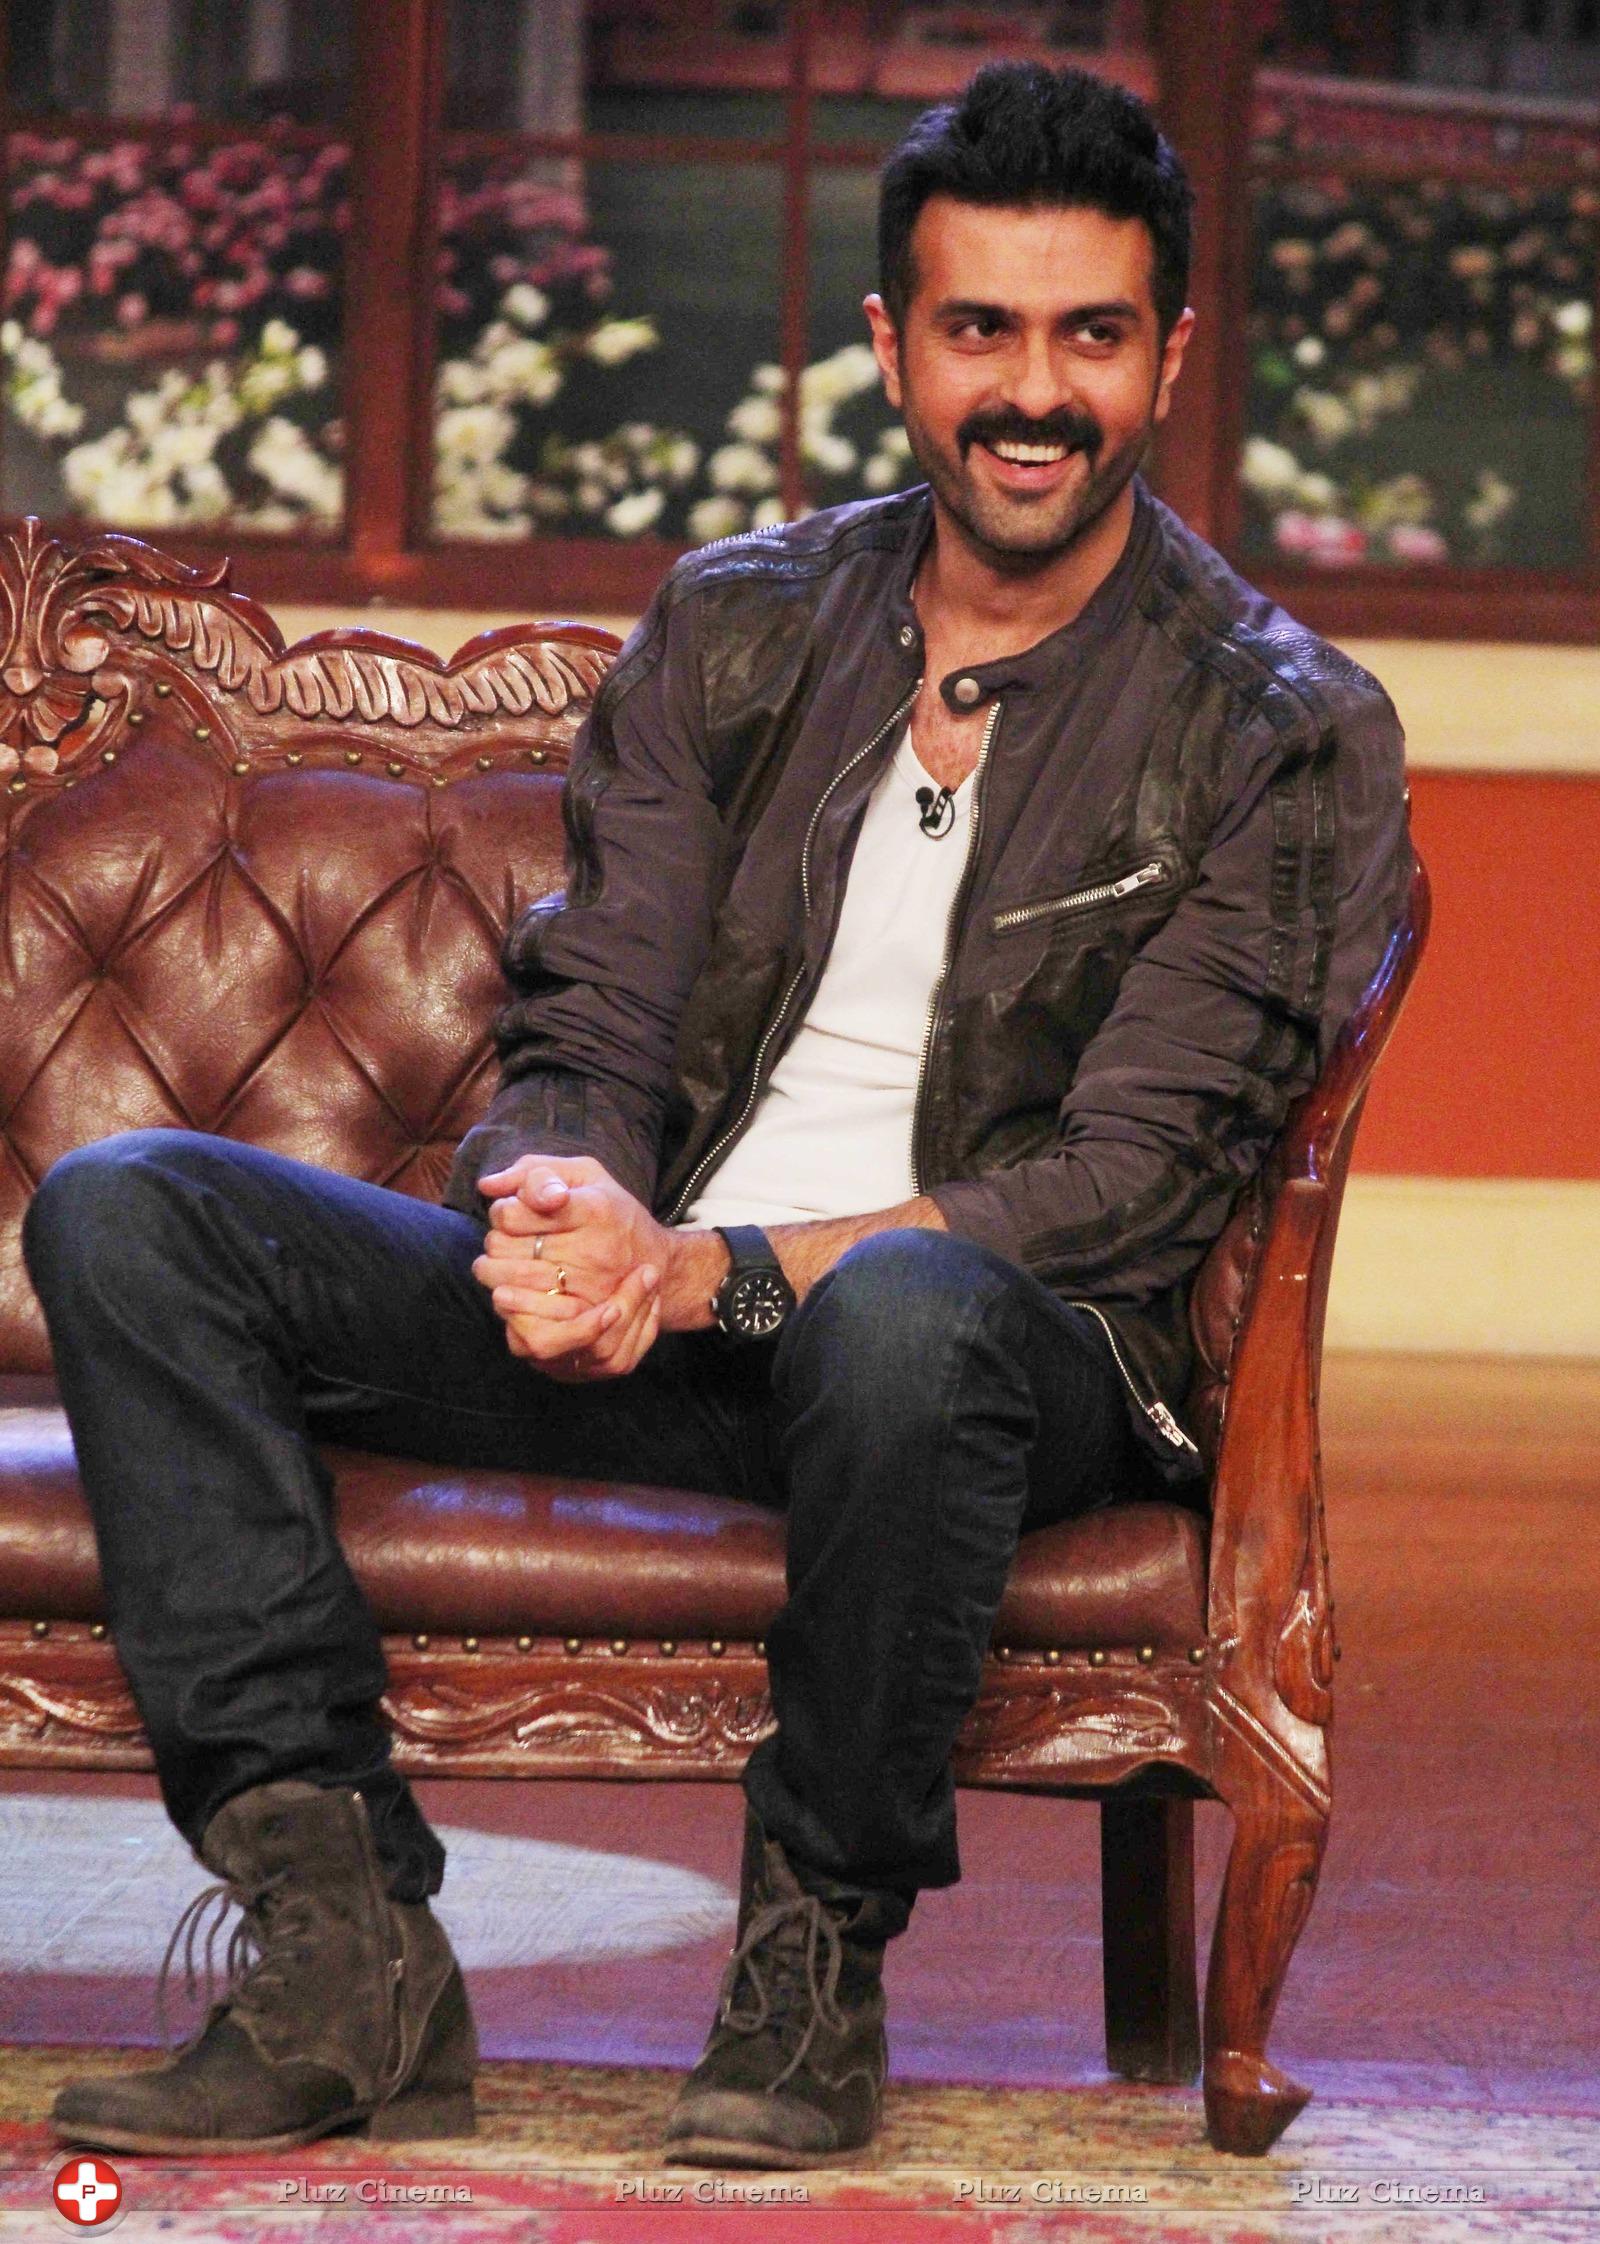 Harman Baweja - Promotion of film Dishkiyaoon on the sets of Comedy Nights with Kapil Photos | Picture 728026